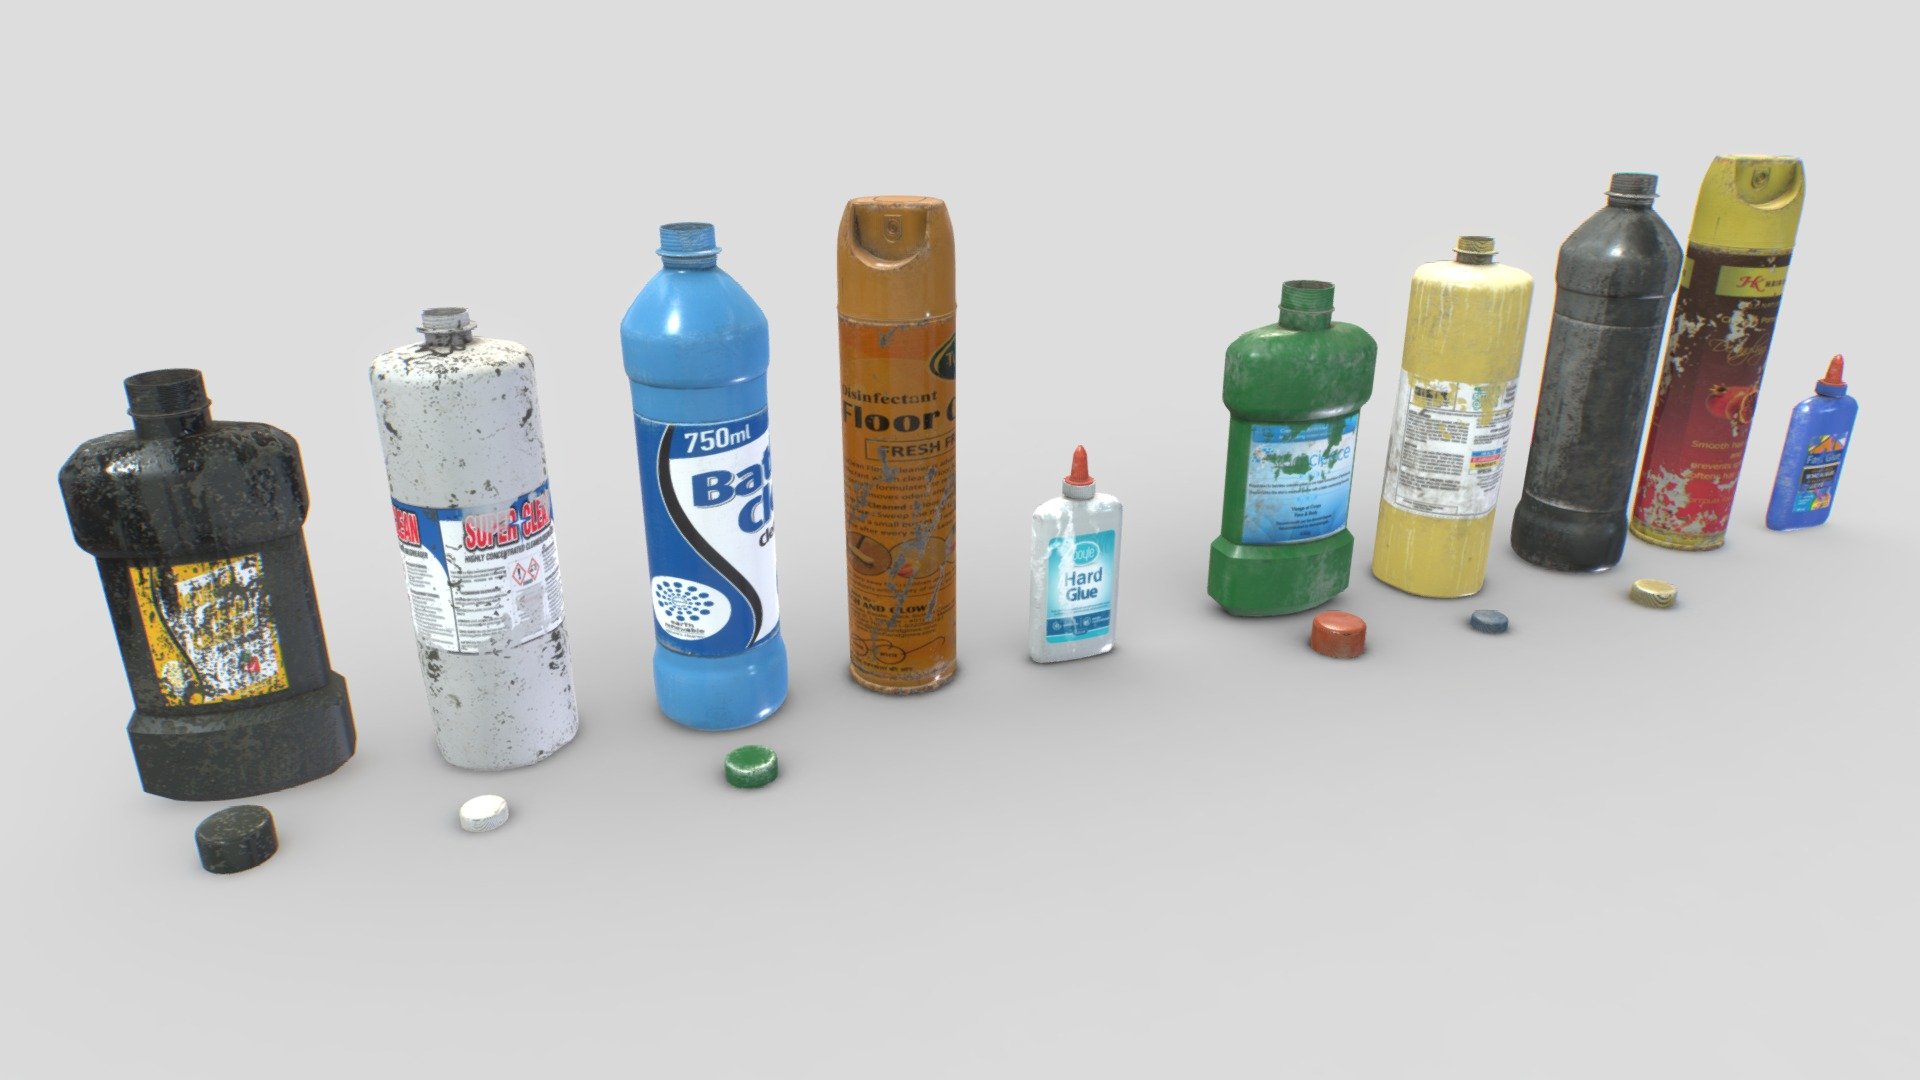 Pack of junk of plastic bottles and sprays. Realistic scale. Includes cleaners, glue bottles and sprays . 8 meshes.

Each object comes with 2 texture sets (materials), for a total of 16 different objects and 2 materials. Each mesh use 1 material only.

PBR 4096x PBR textures including Albedo, Normal, Metalness, Roughness and AO. Unreal ARM mask texture included (ao, rough, metal). Also unity HDRP mask included.

6k verts and 13k tris in total.

Suitable for garages, landfill, street trash, apocalyptic scenes, etc&hellip; - Cleaning Tools Junk - Buy Royalty Free 3D model by 32cm 3d model